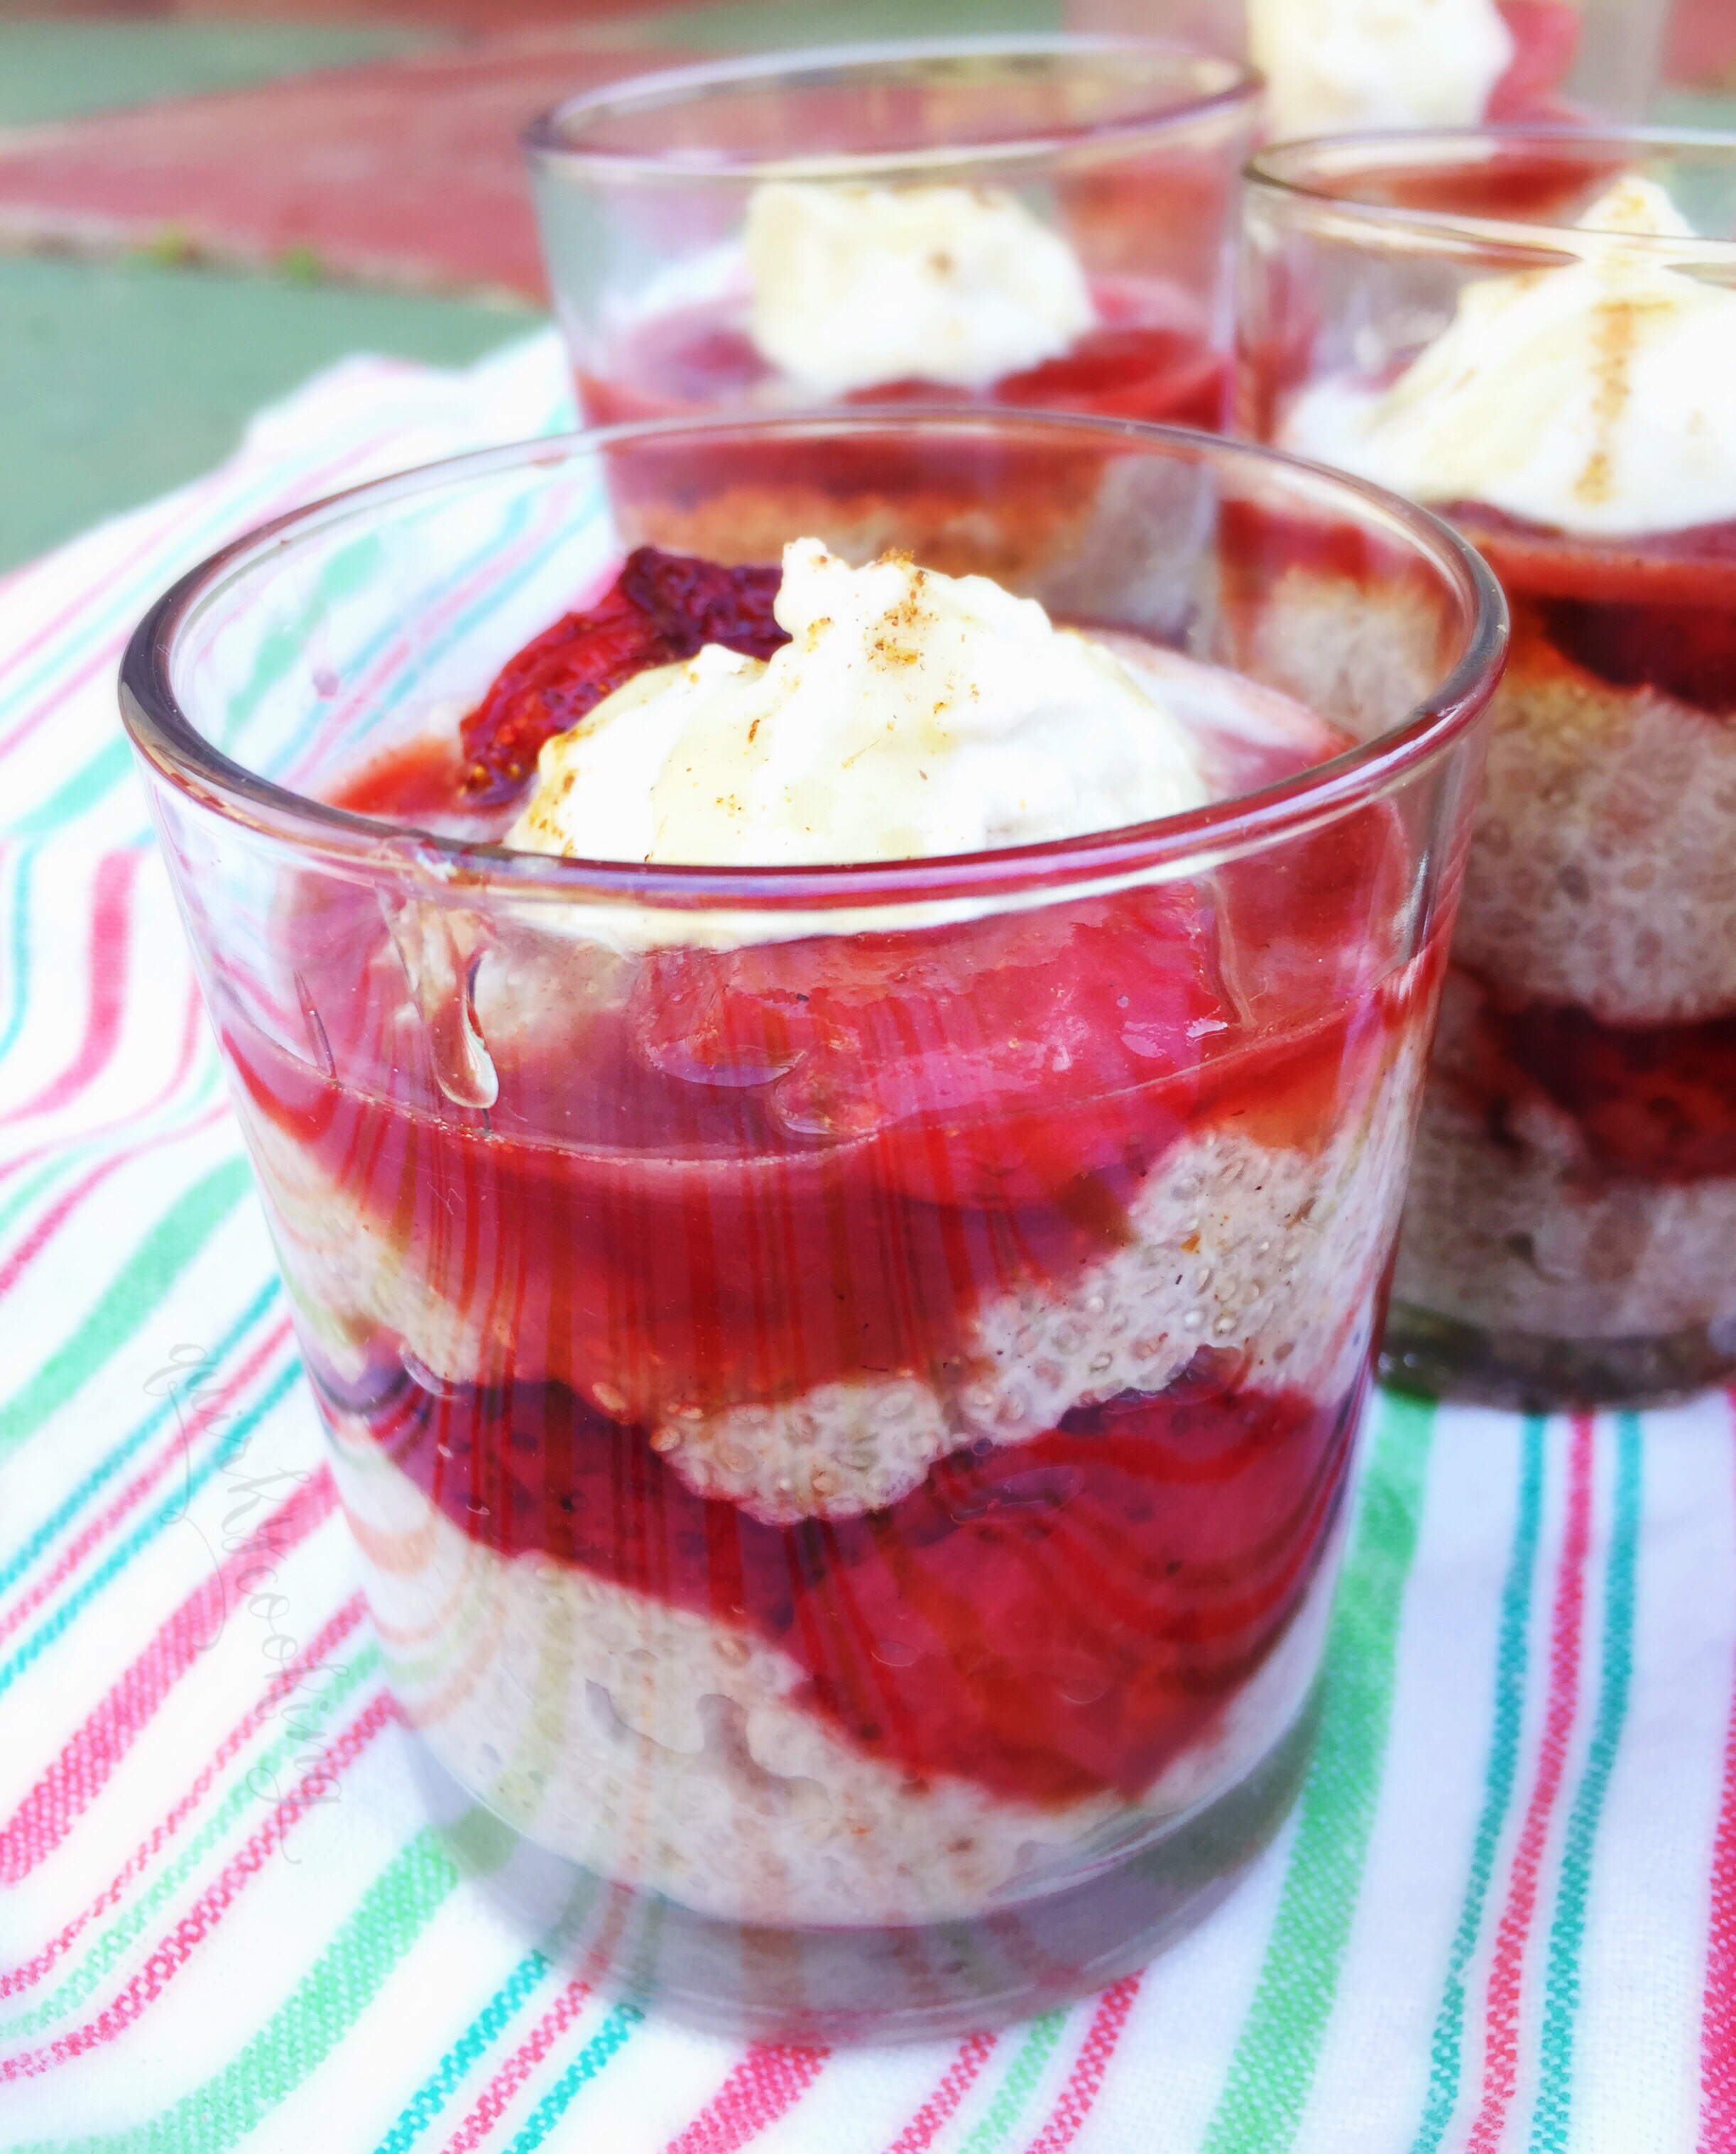 Coconut Spice & Roasted Strawberry Chia Puddings - Quirky Cooking